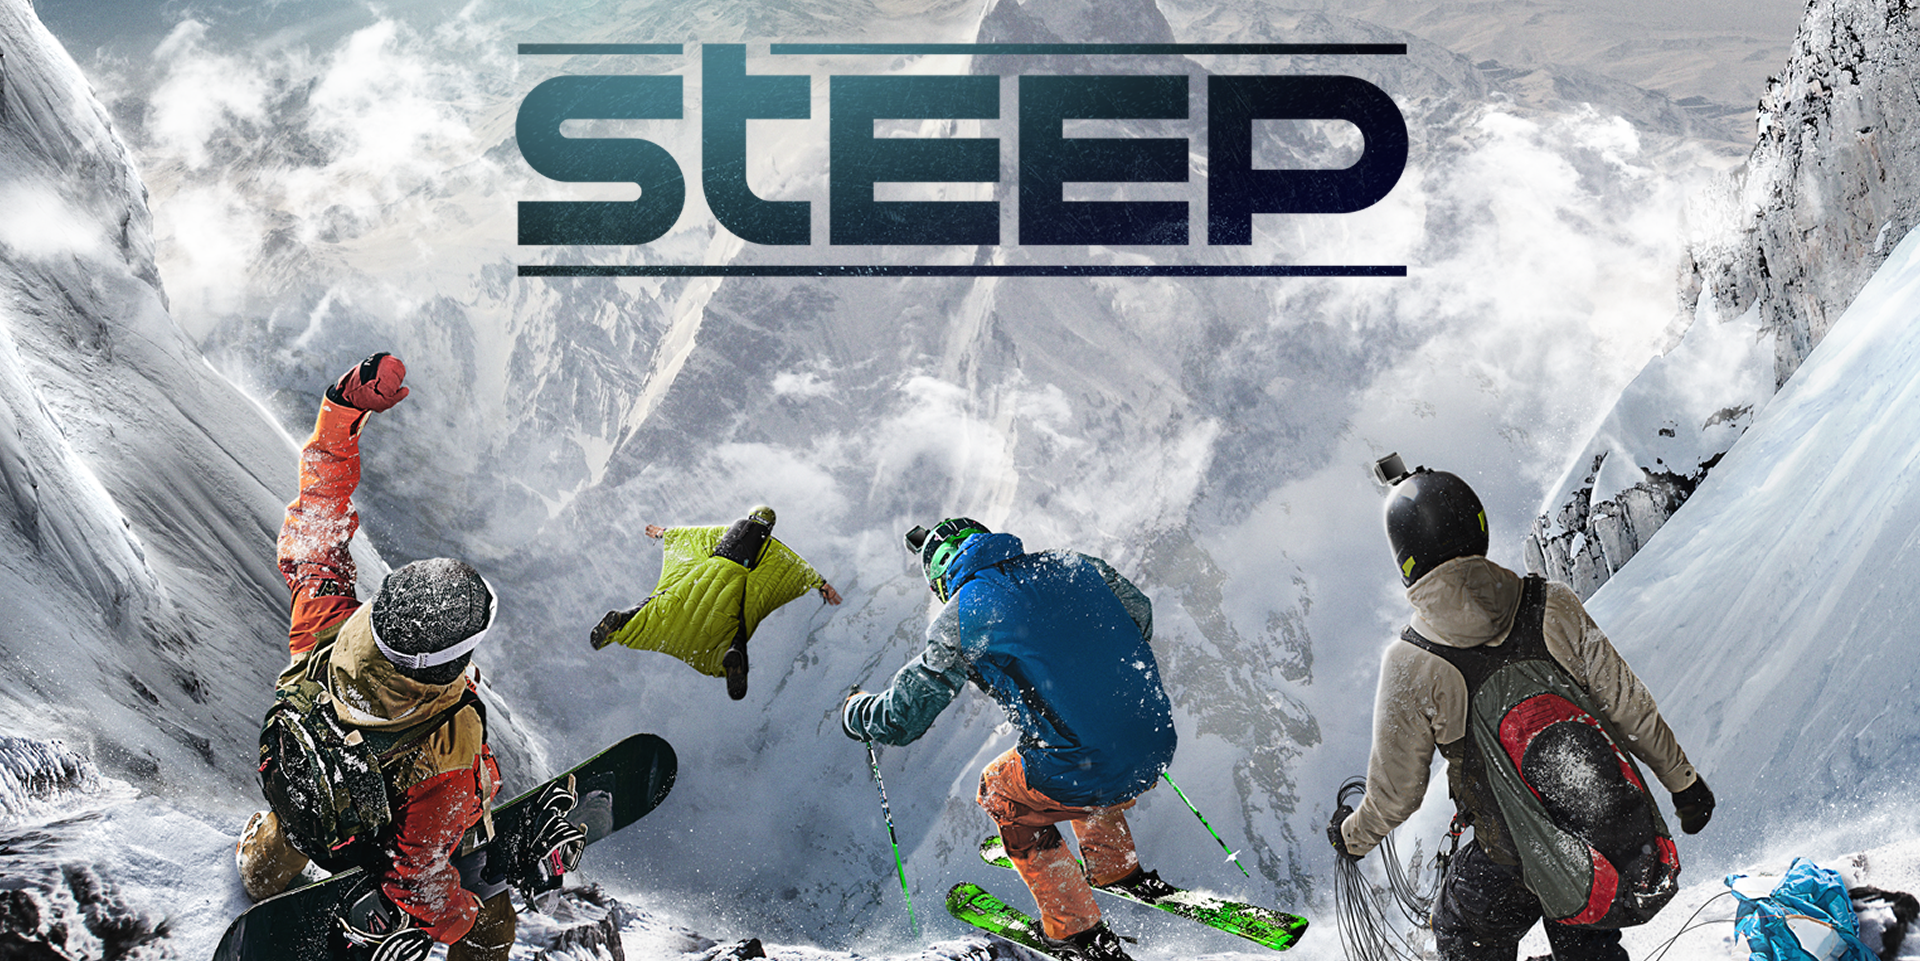 Steep at the best price